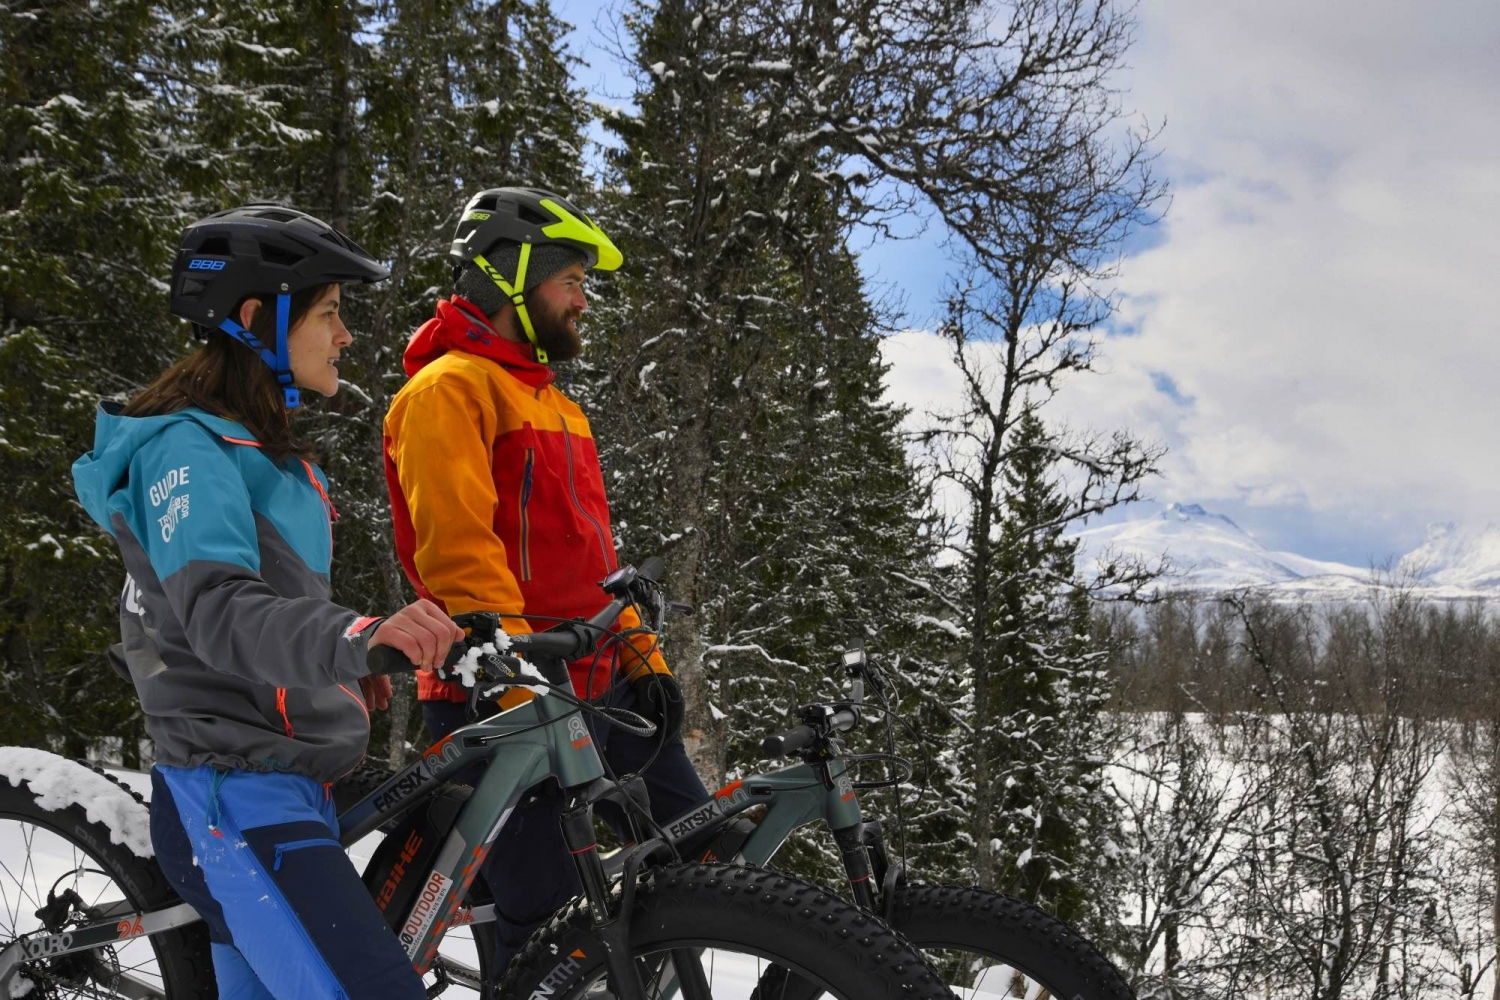 Two persons enjoying the view from their fatbikes